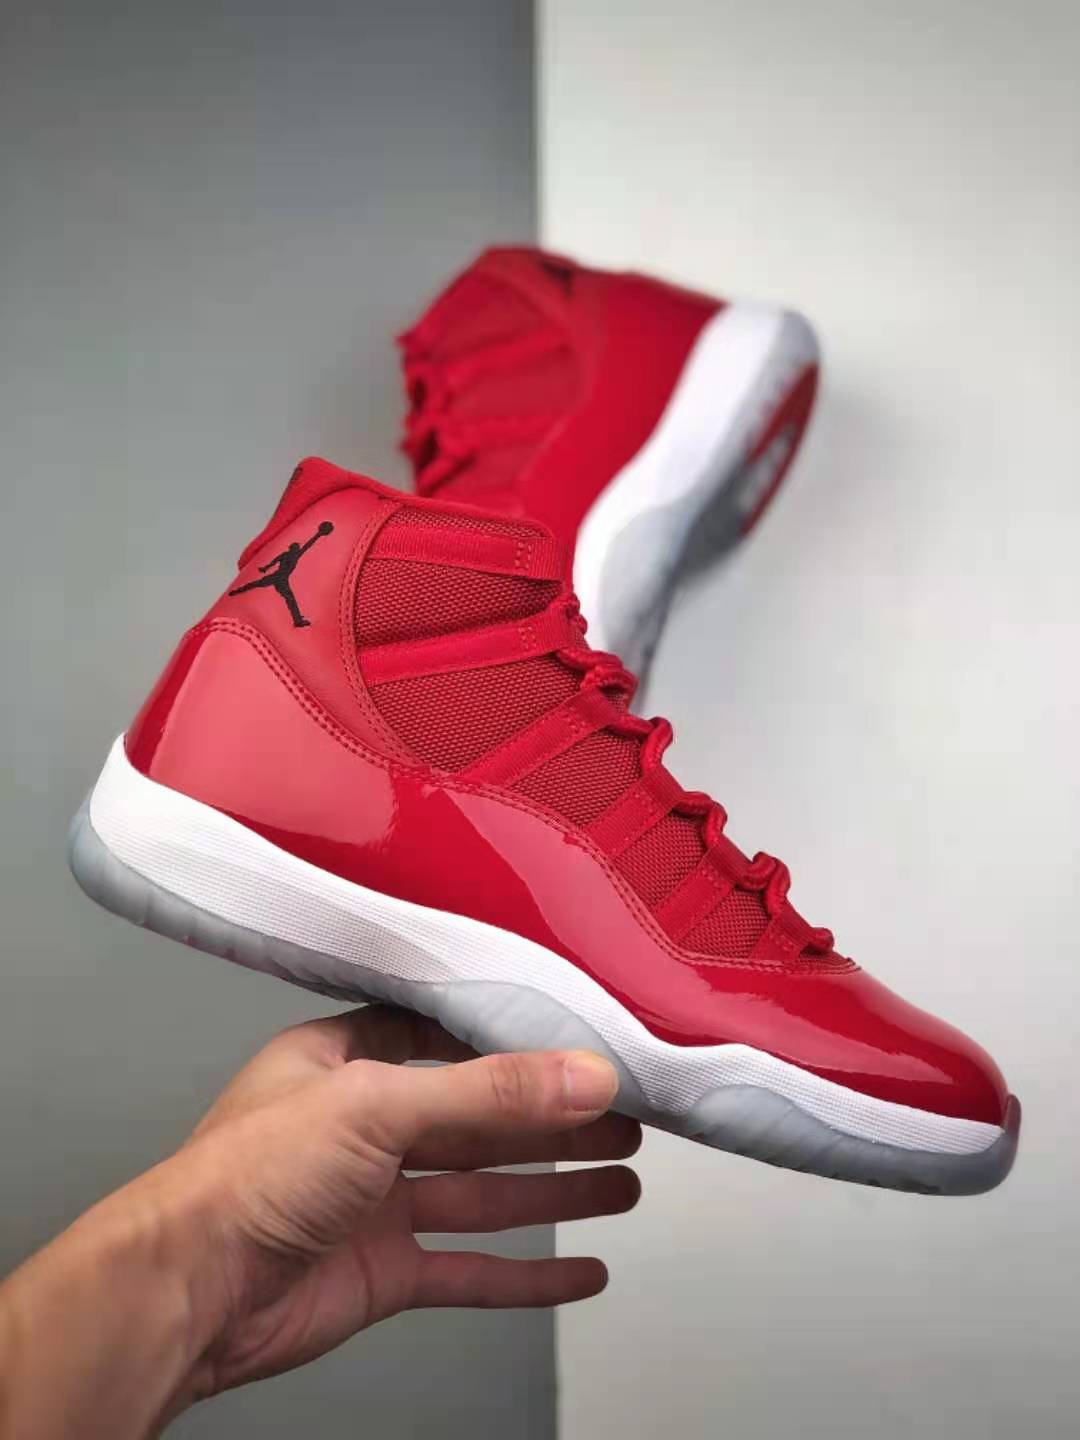 Air Jordan 11 Retro 'Win Like '96' 378037-623 - Unmatched Style and Performance